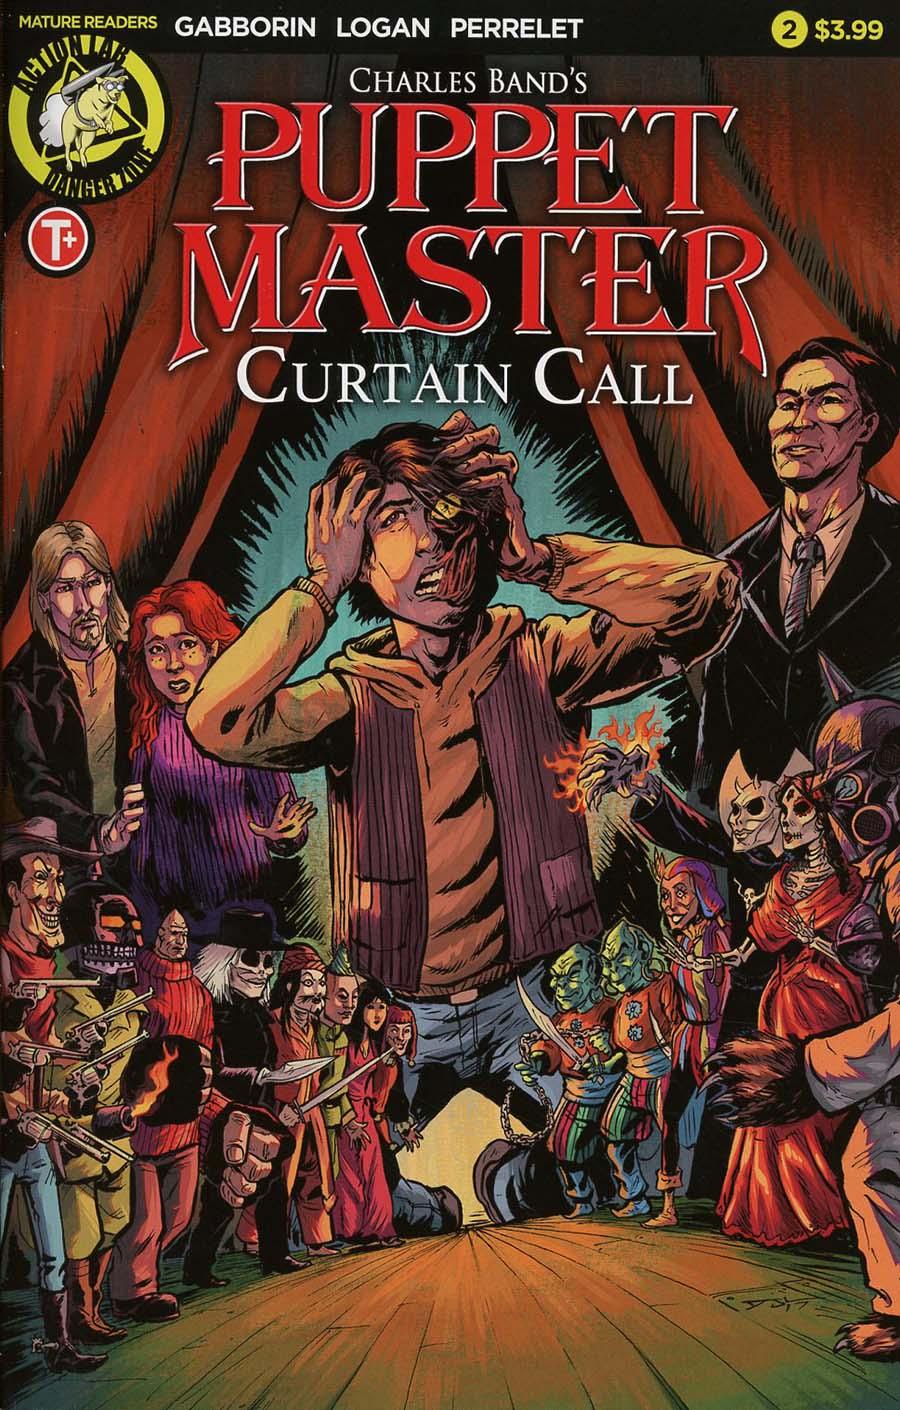 Puppet Master Curtain Call Vol. 1 #2